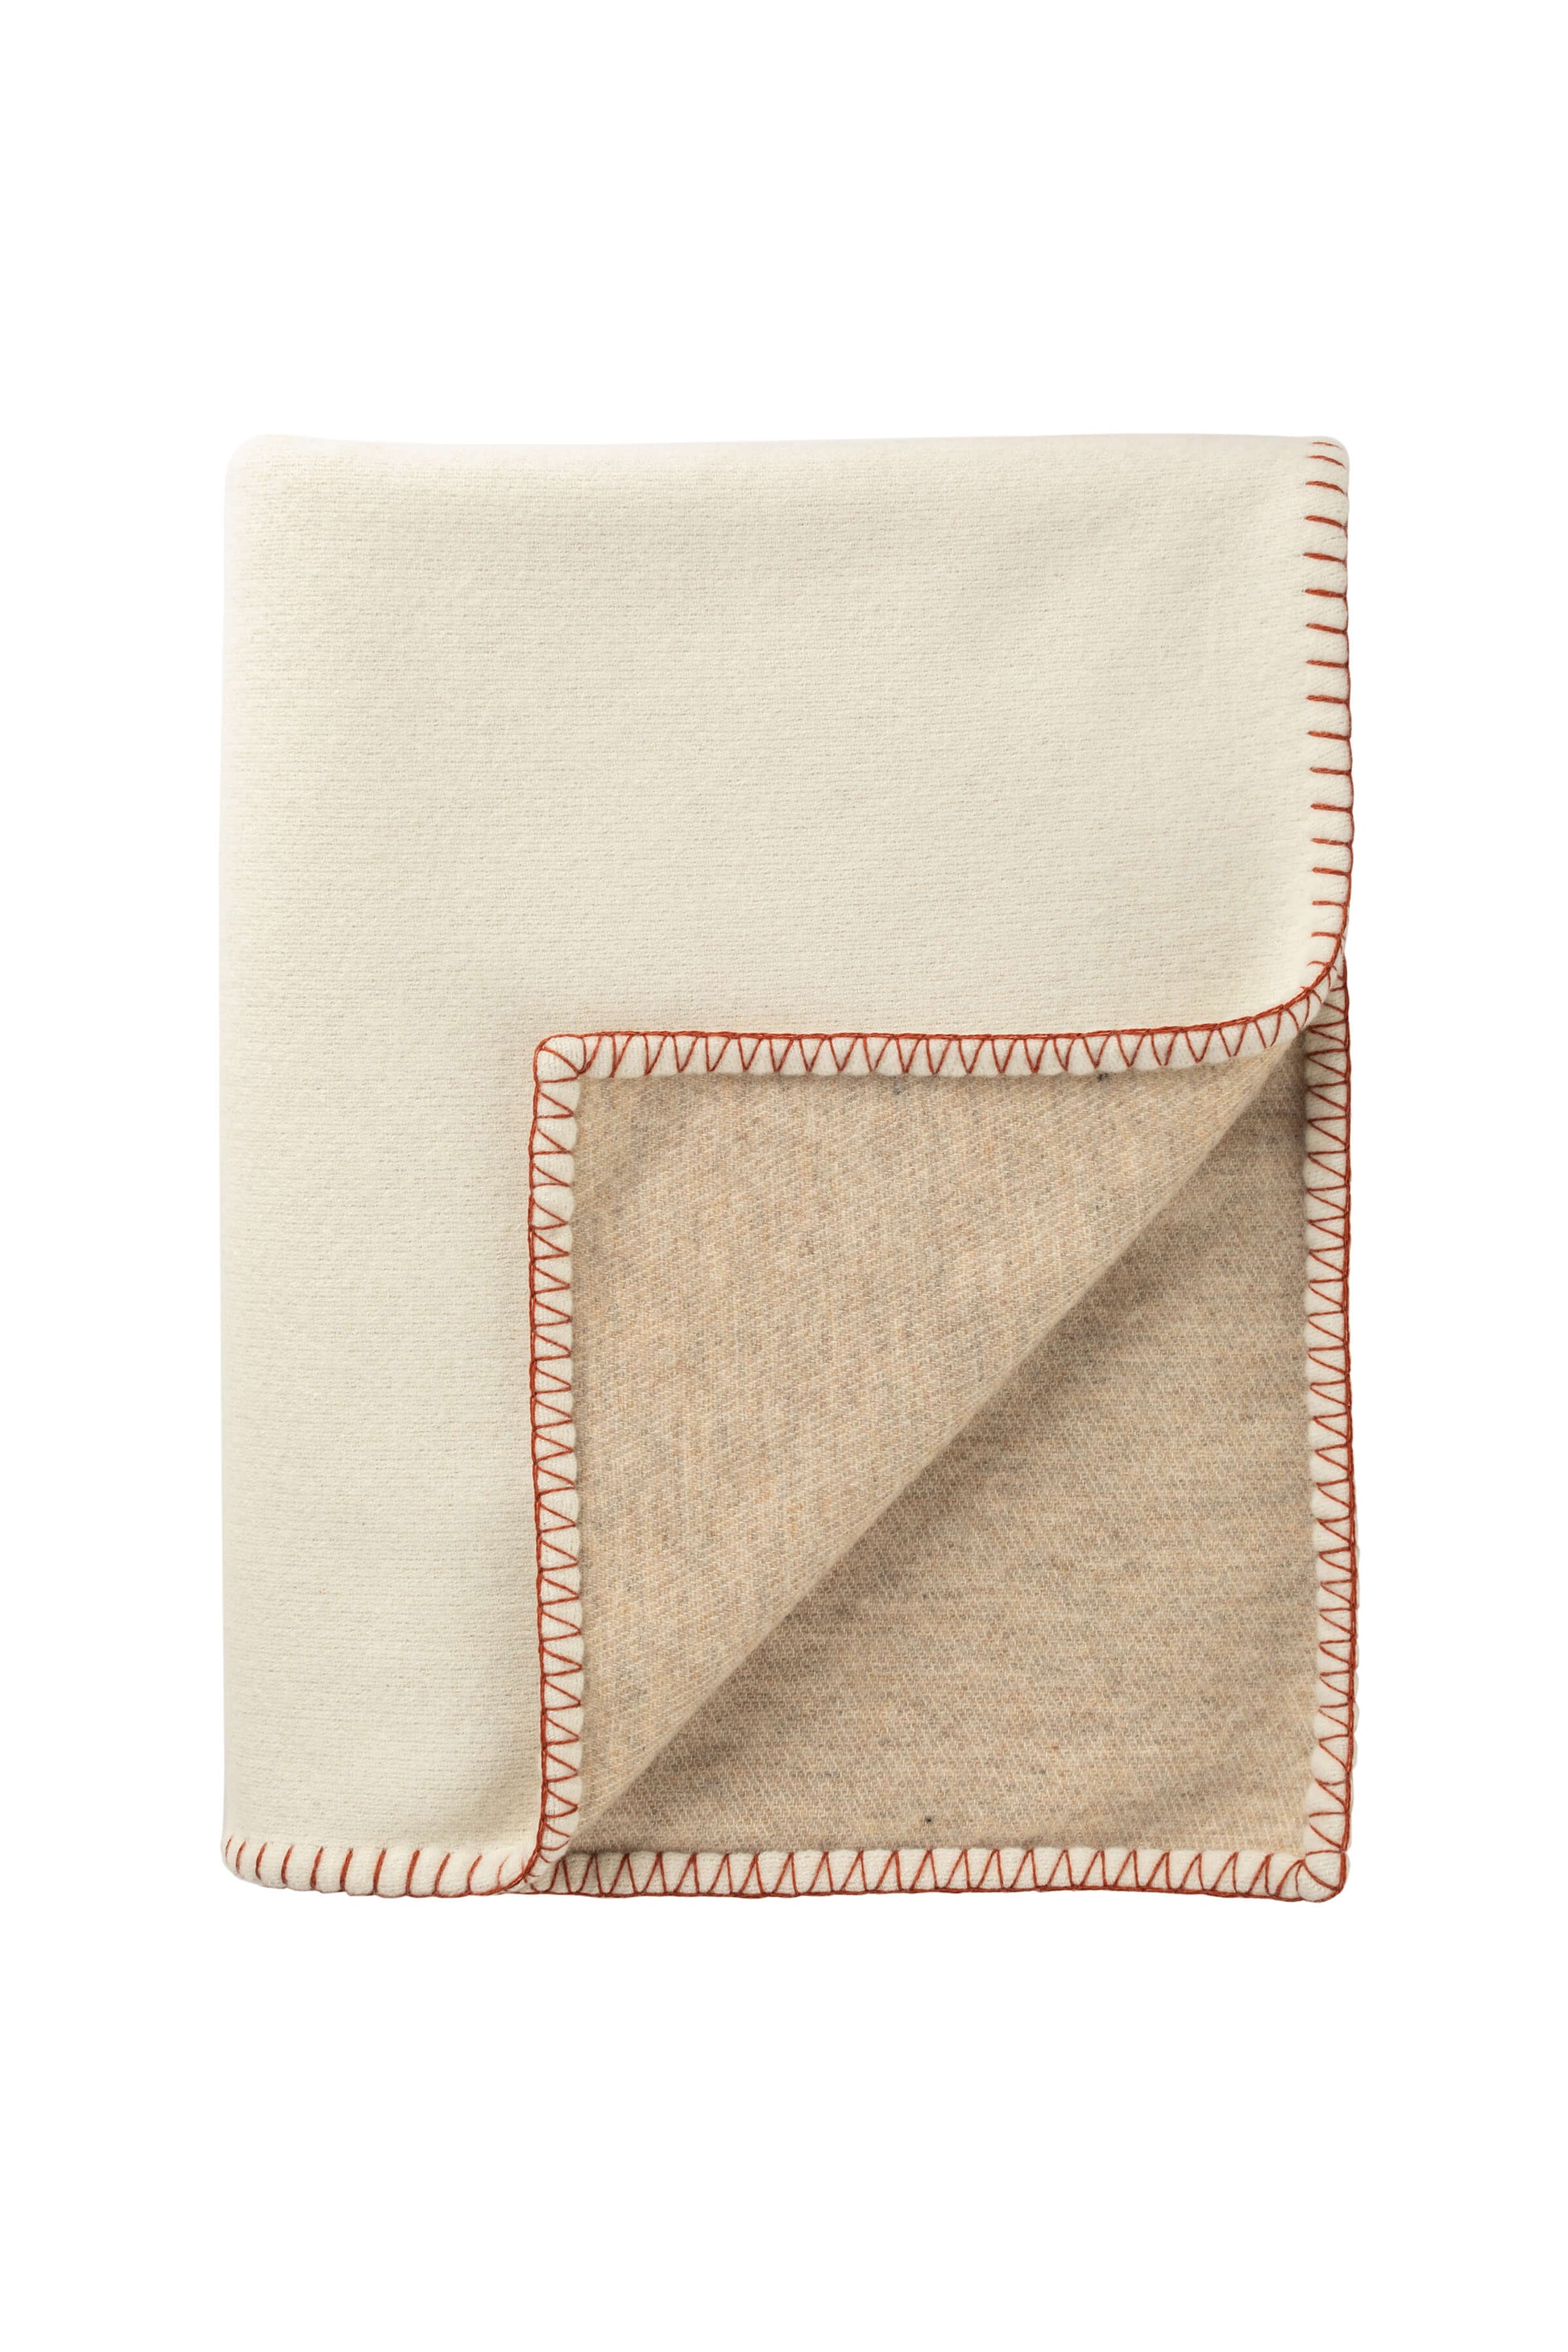 Johnstons of Elgin 2024 Blanket Collection Ecru & Oatmeal Reversible Blanket Stitched Throw TB000500RU7559ONE